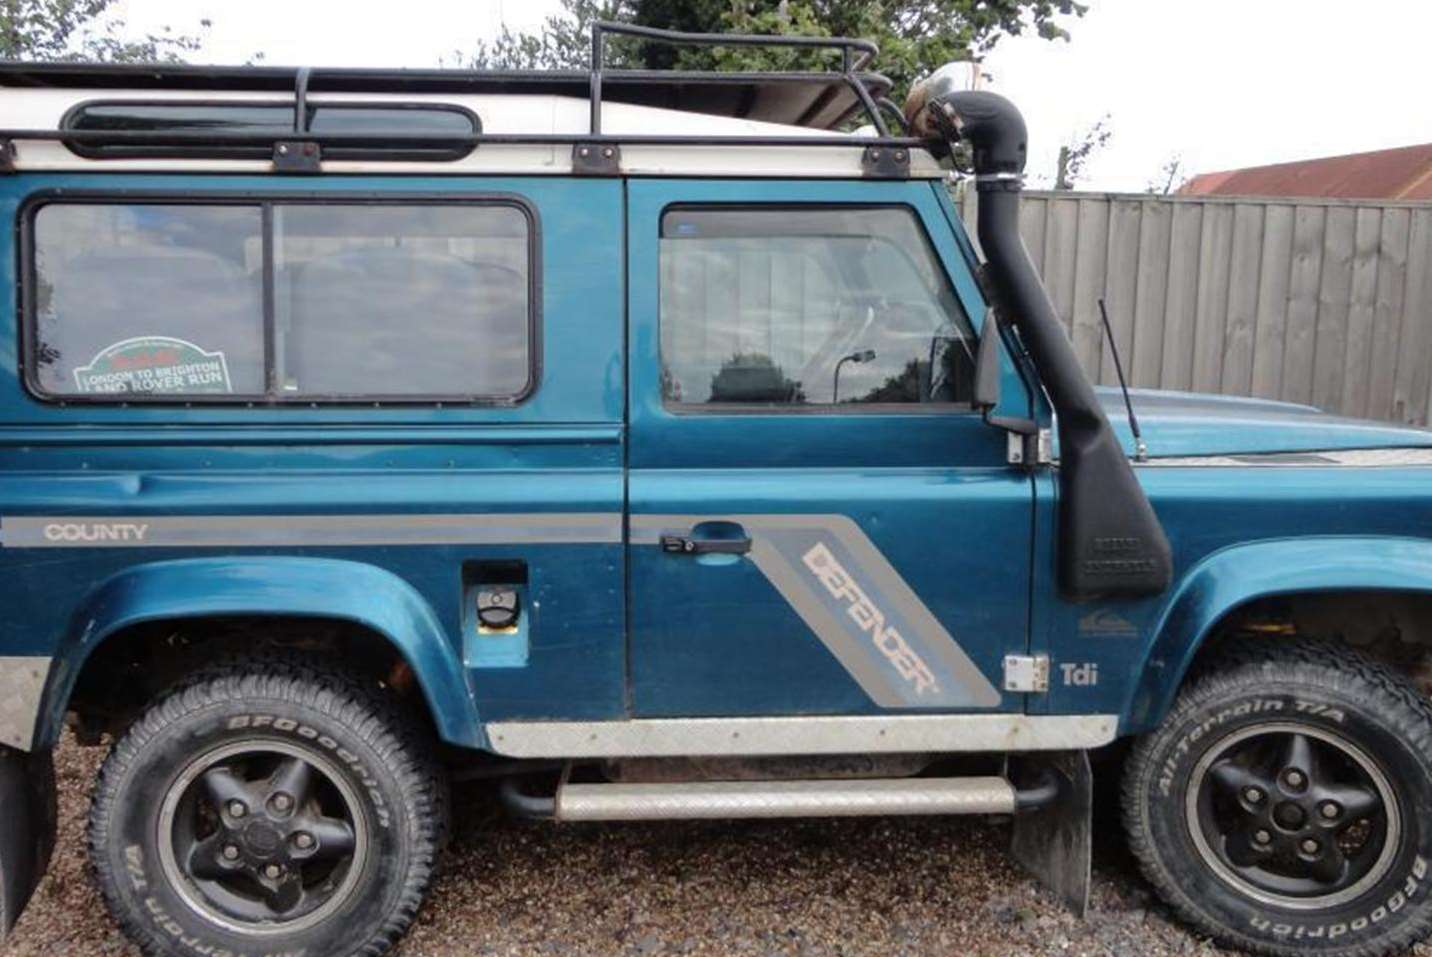 Mrs Wright believes the theft of her Defender 90 was targeted and planned